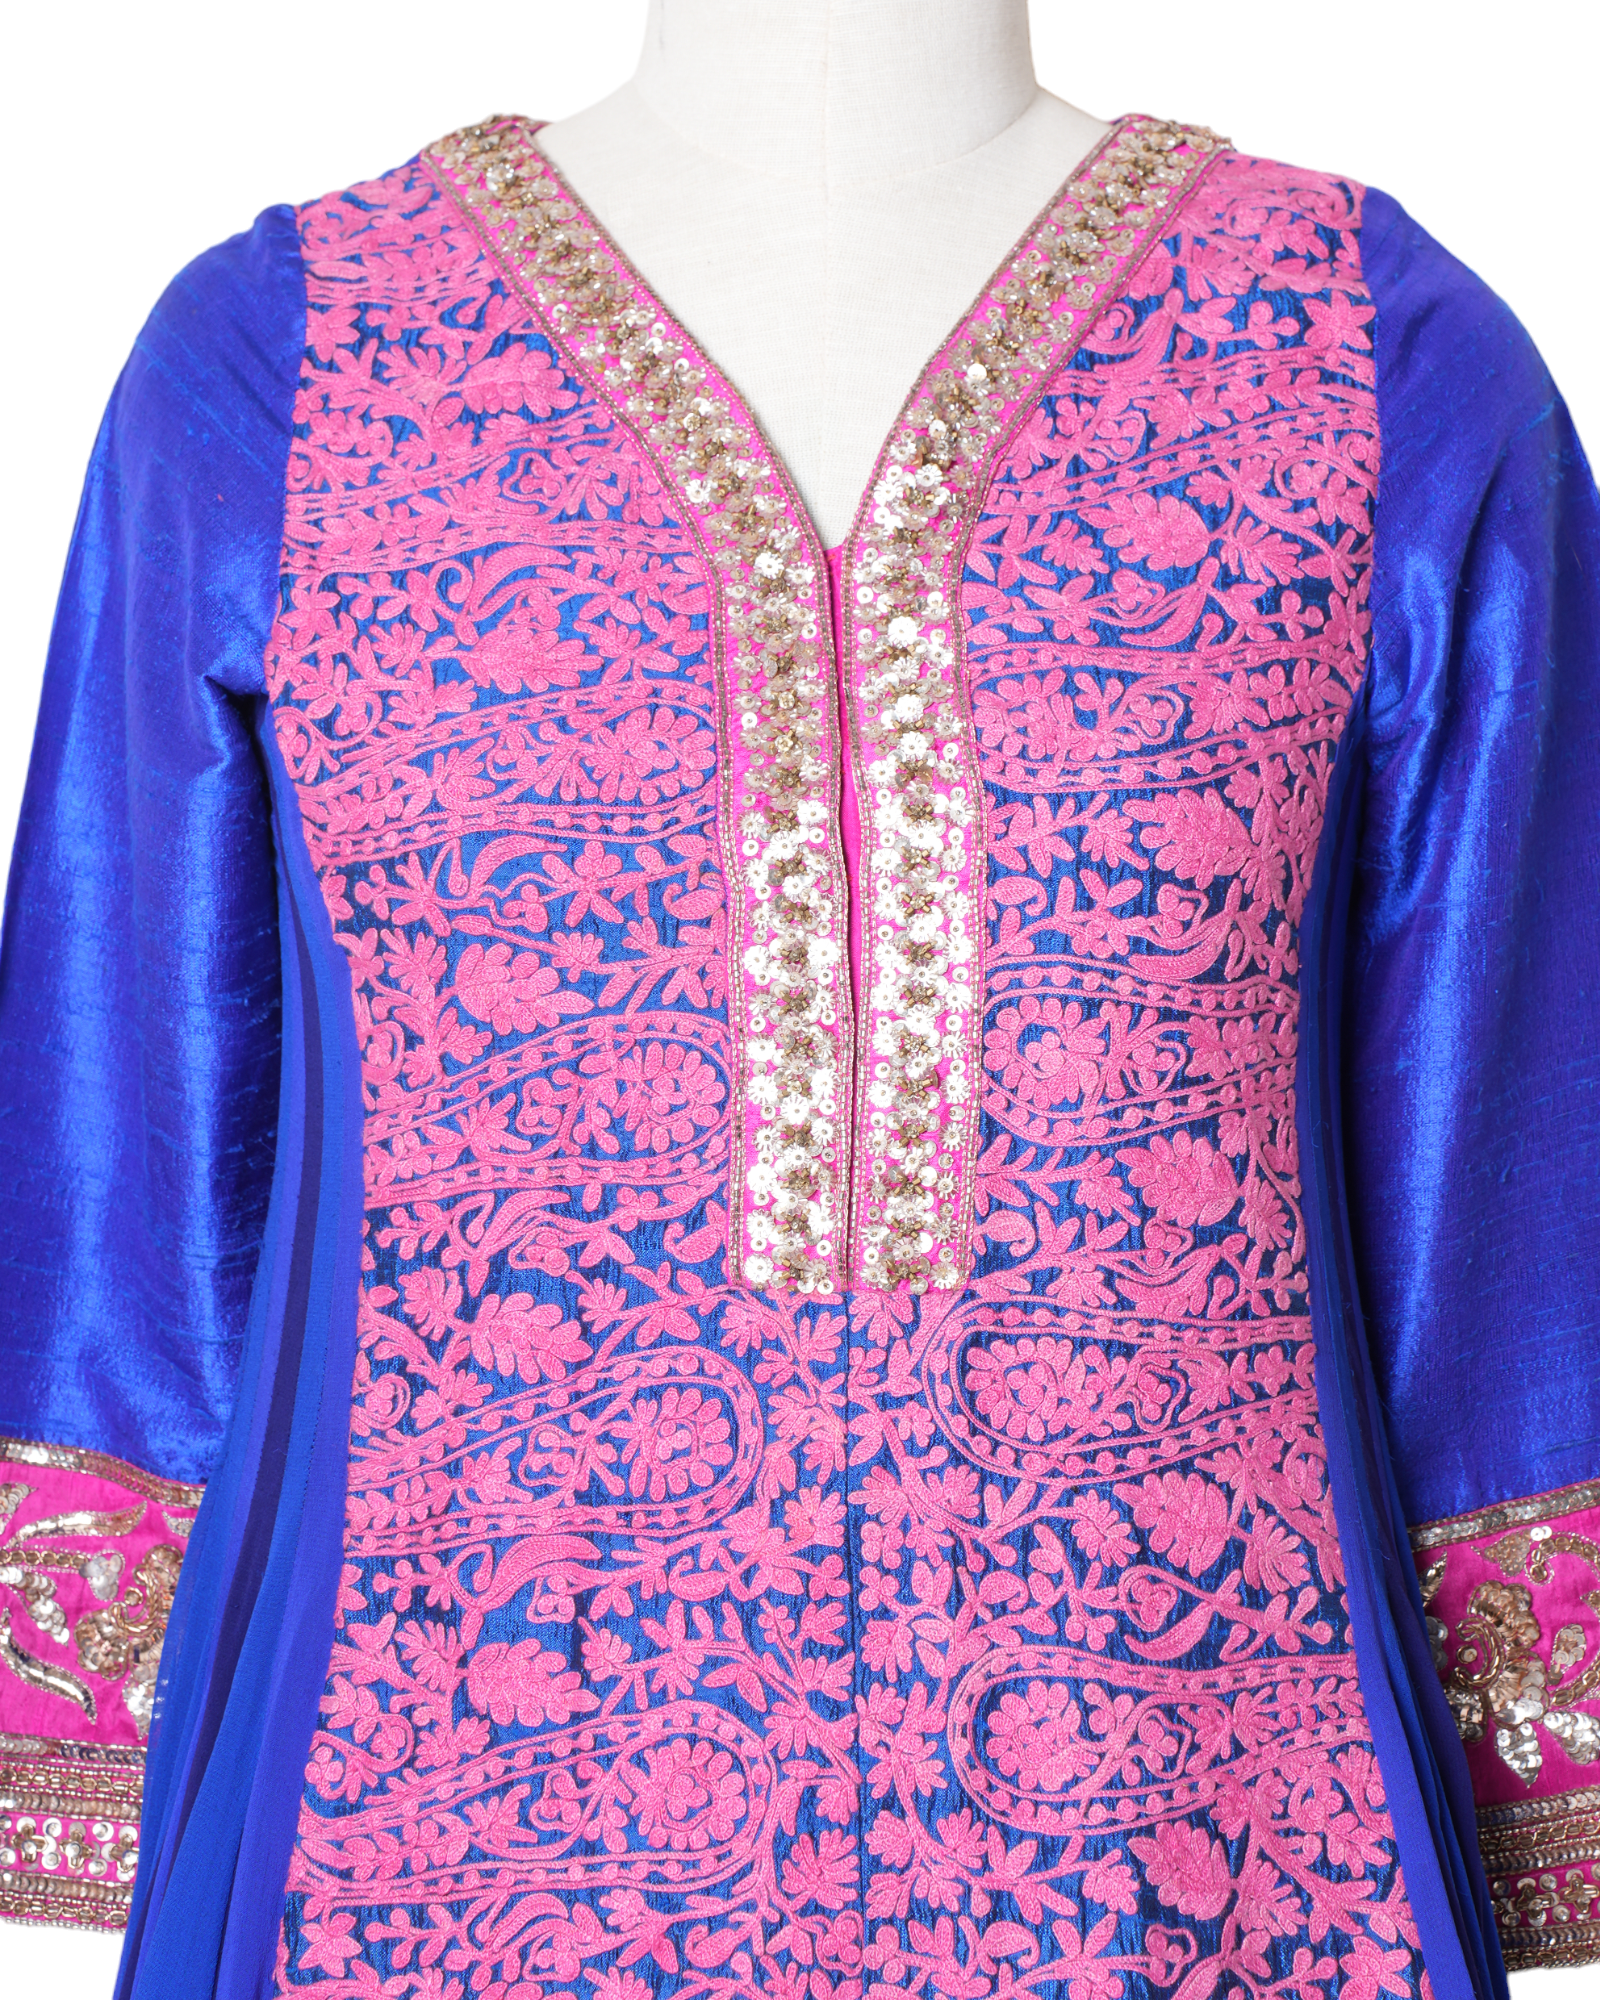 Wrap up in kurti/tunic for a fresh new look this summer